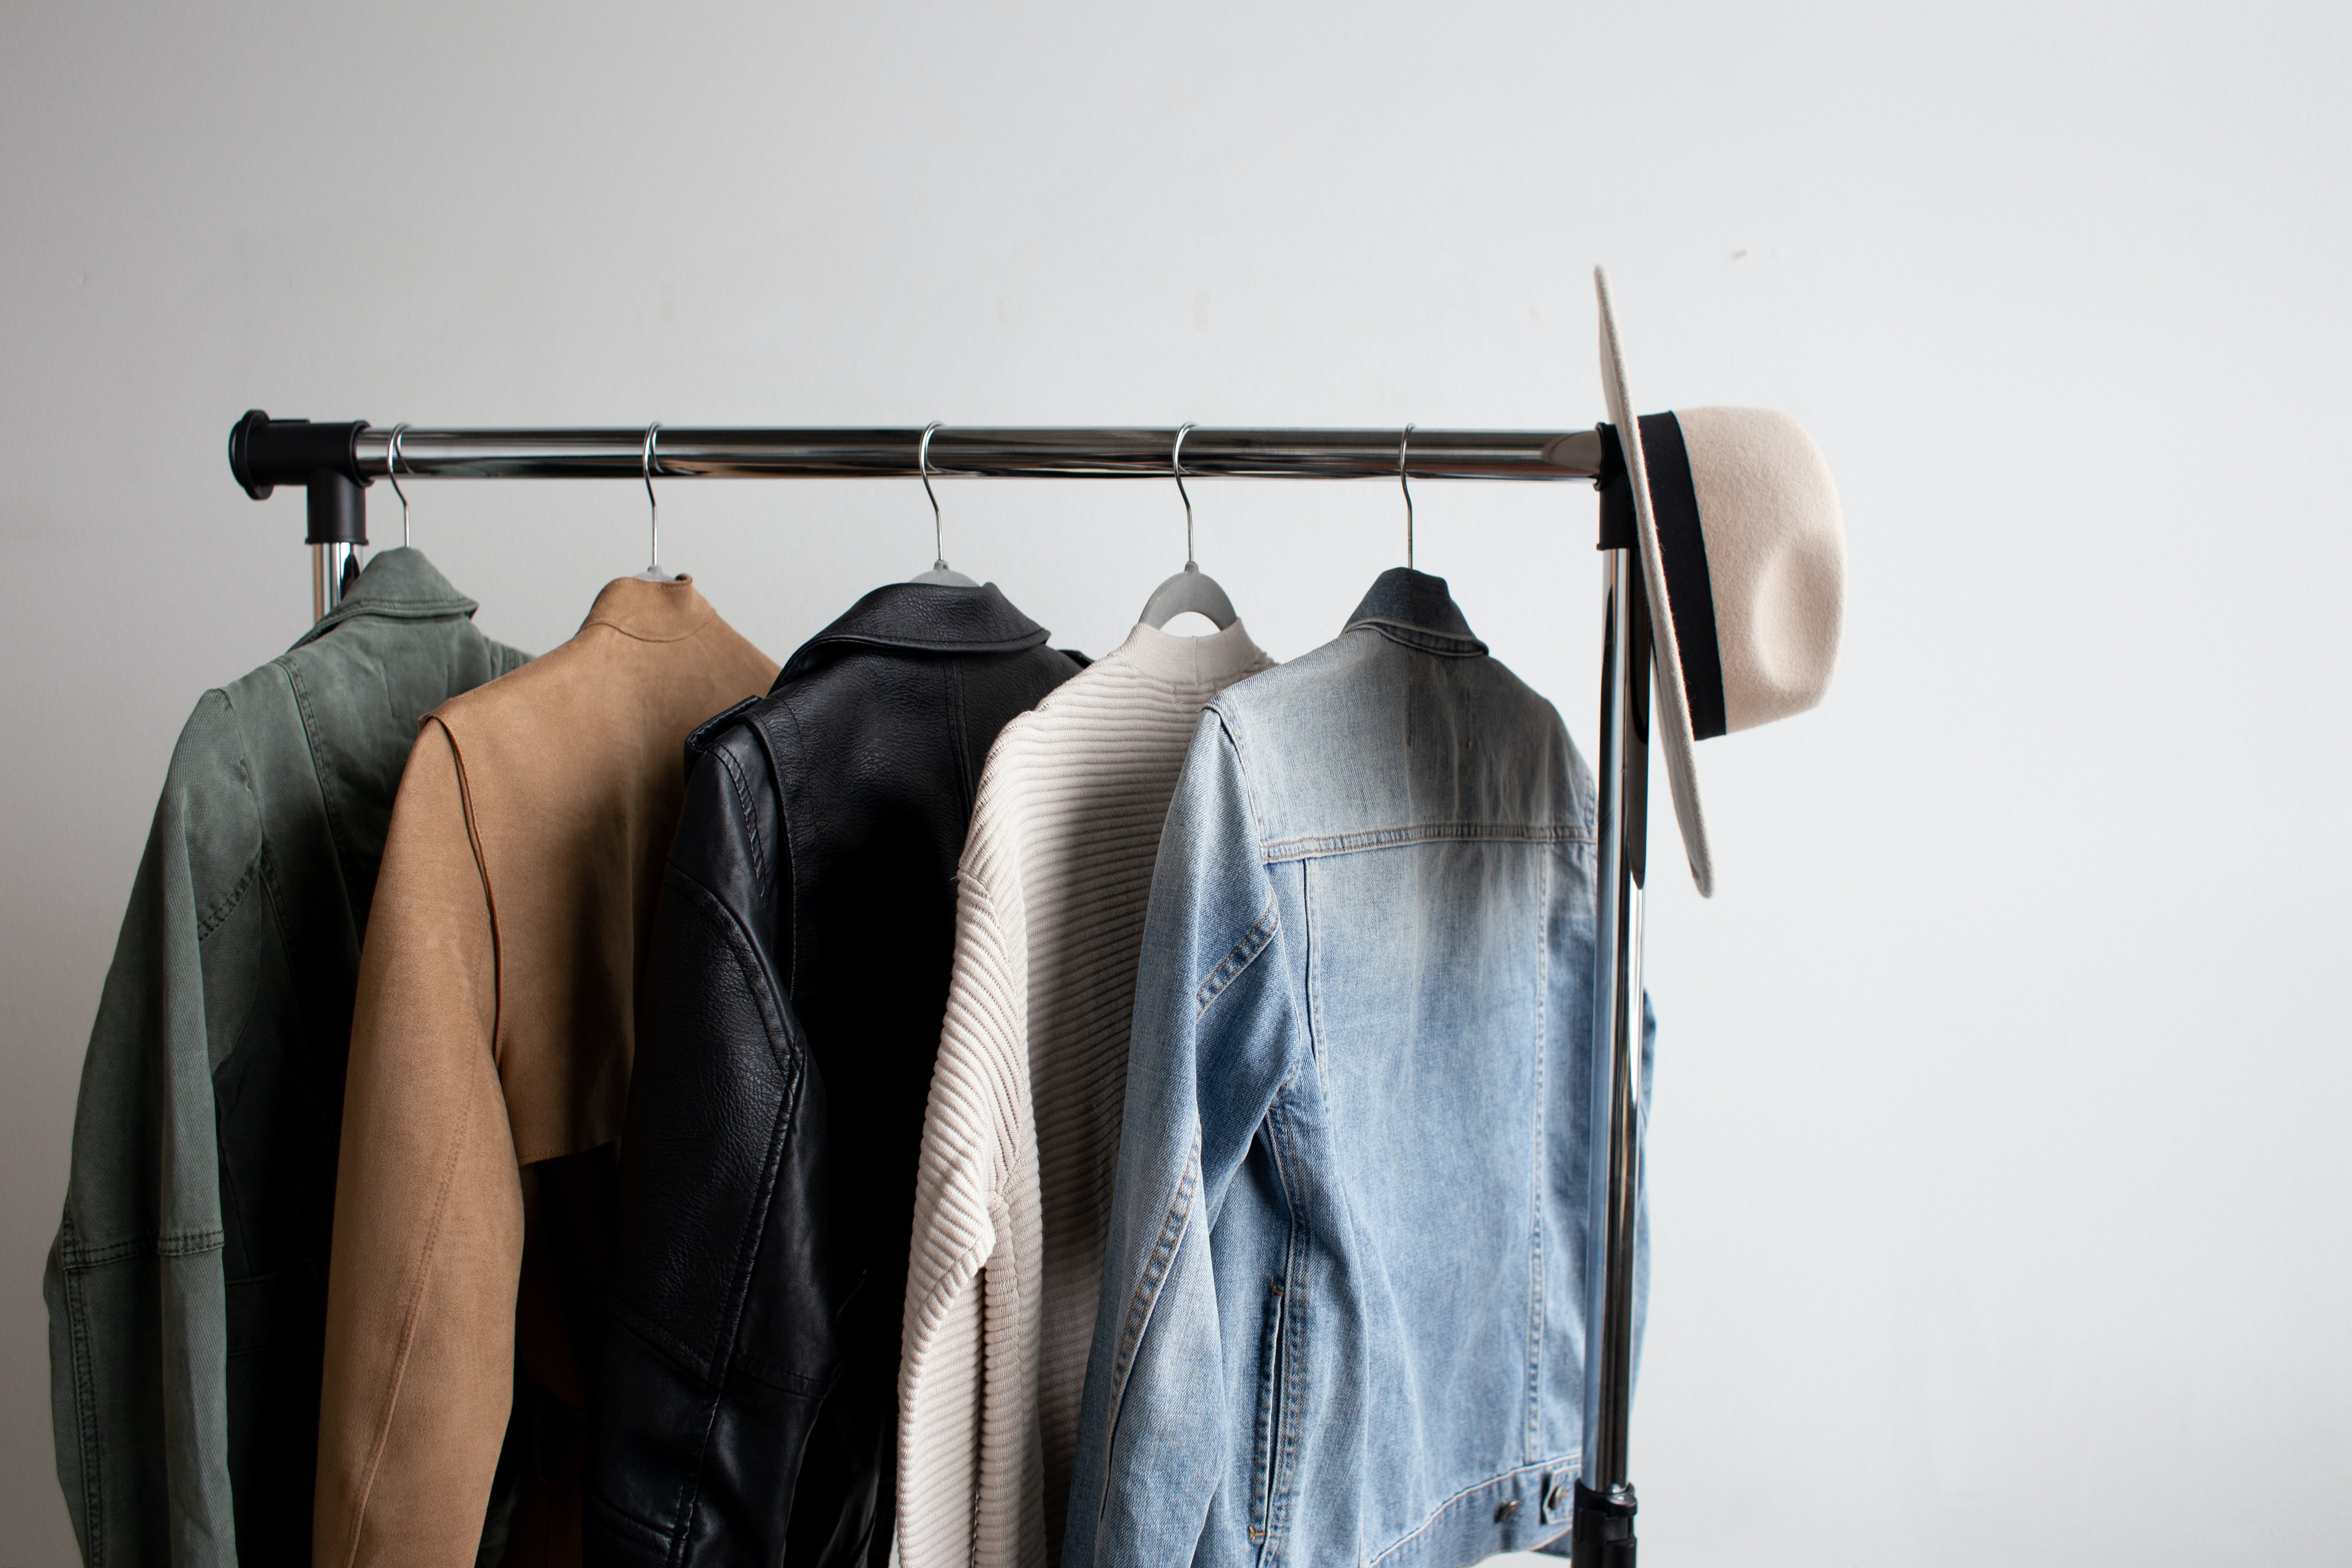 Five jackets and a hat hang on a clothing rack.